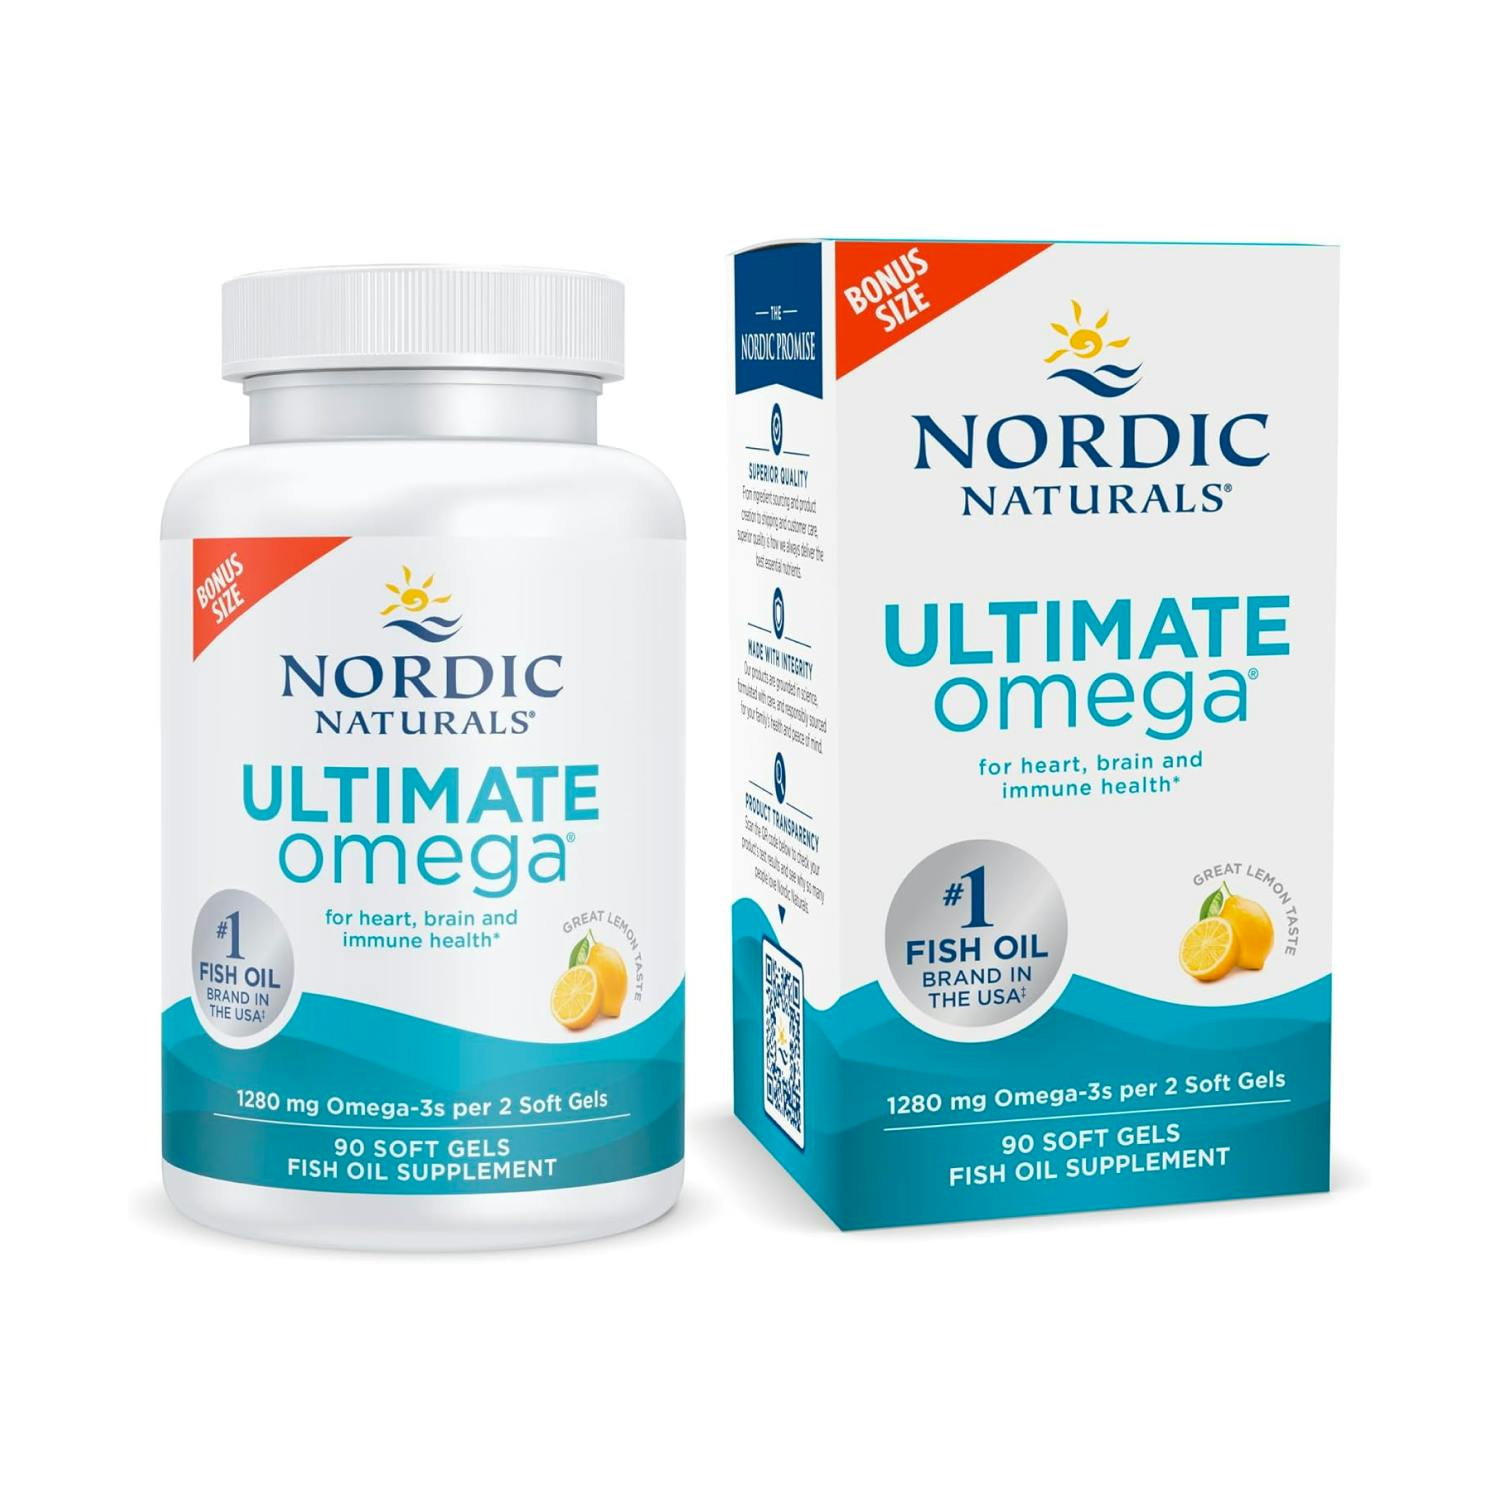 Nordic Naturals Omega-3 with EPA & DHA